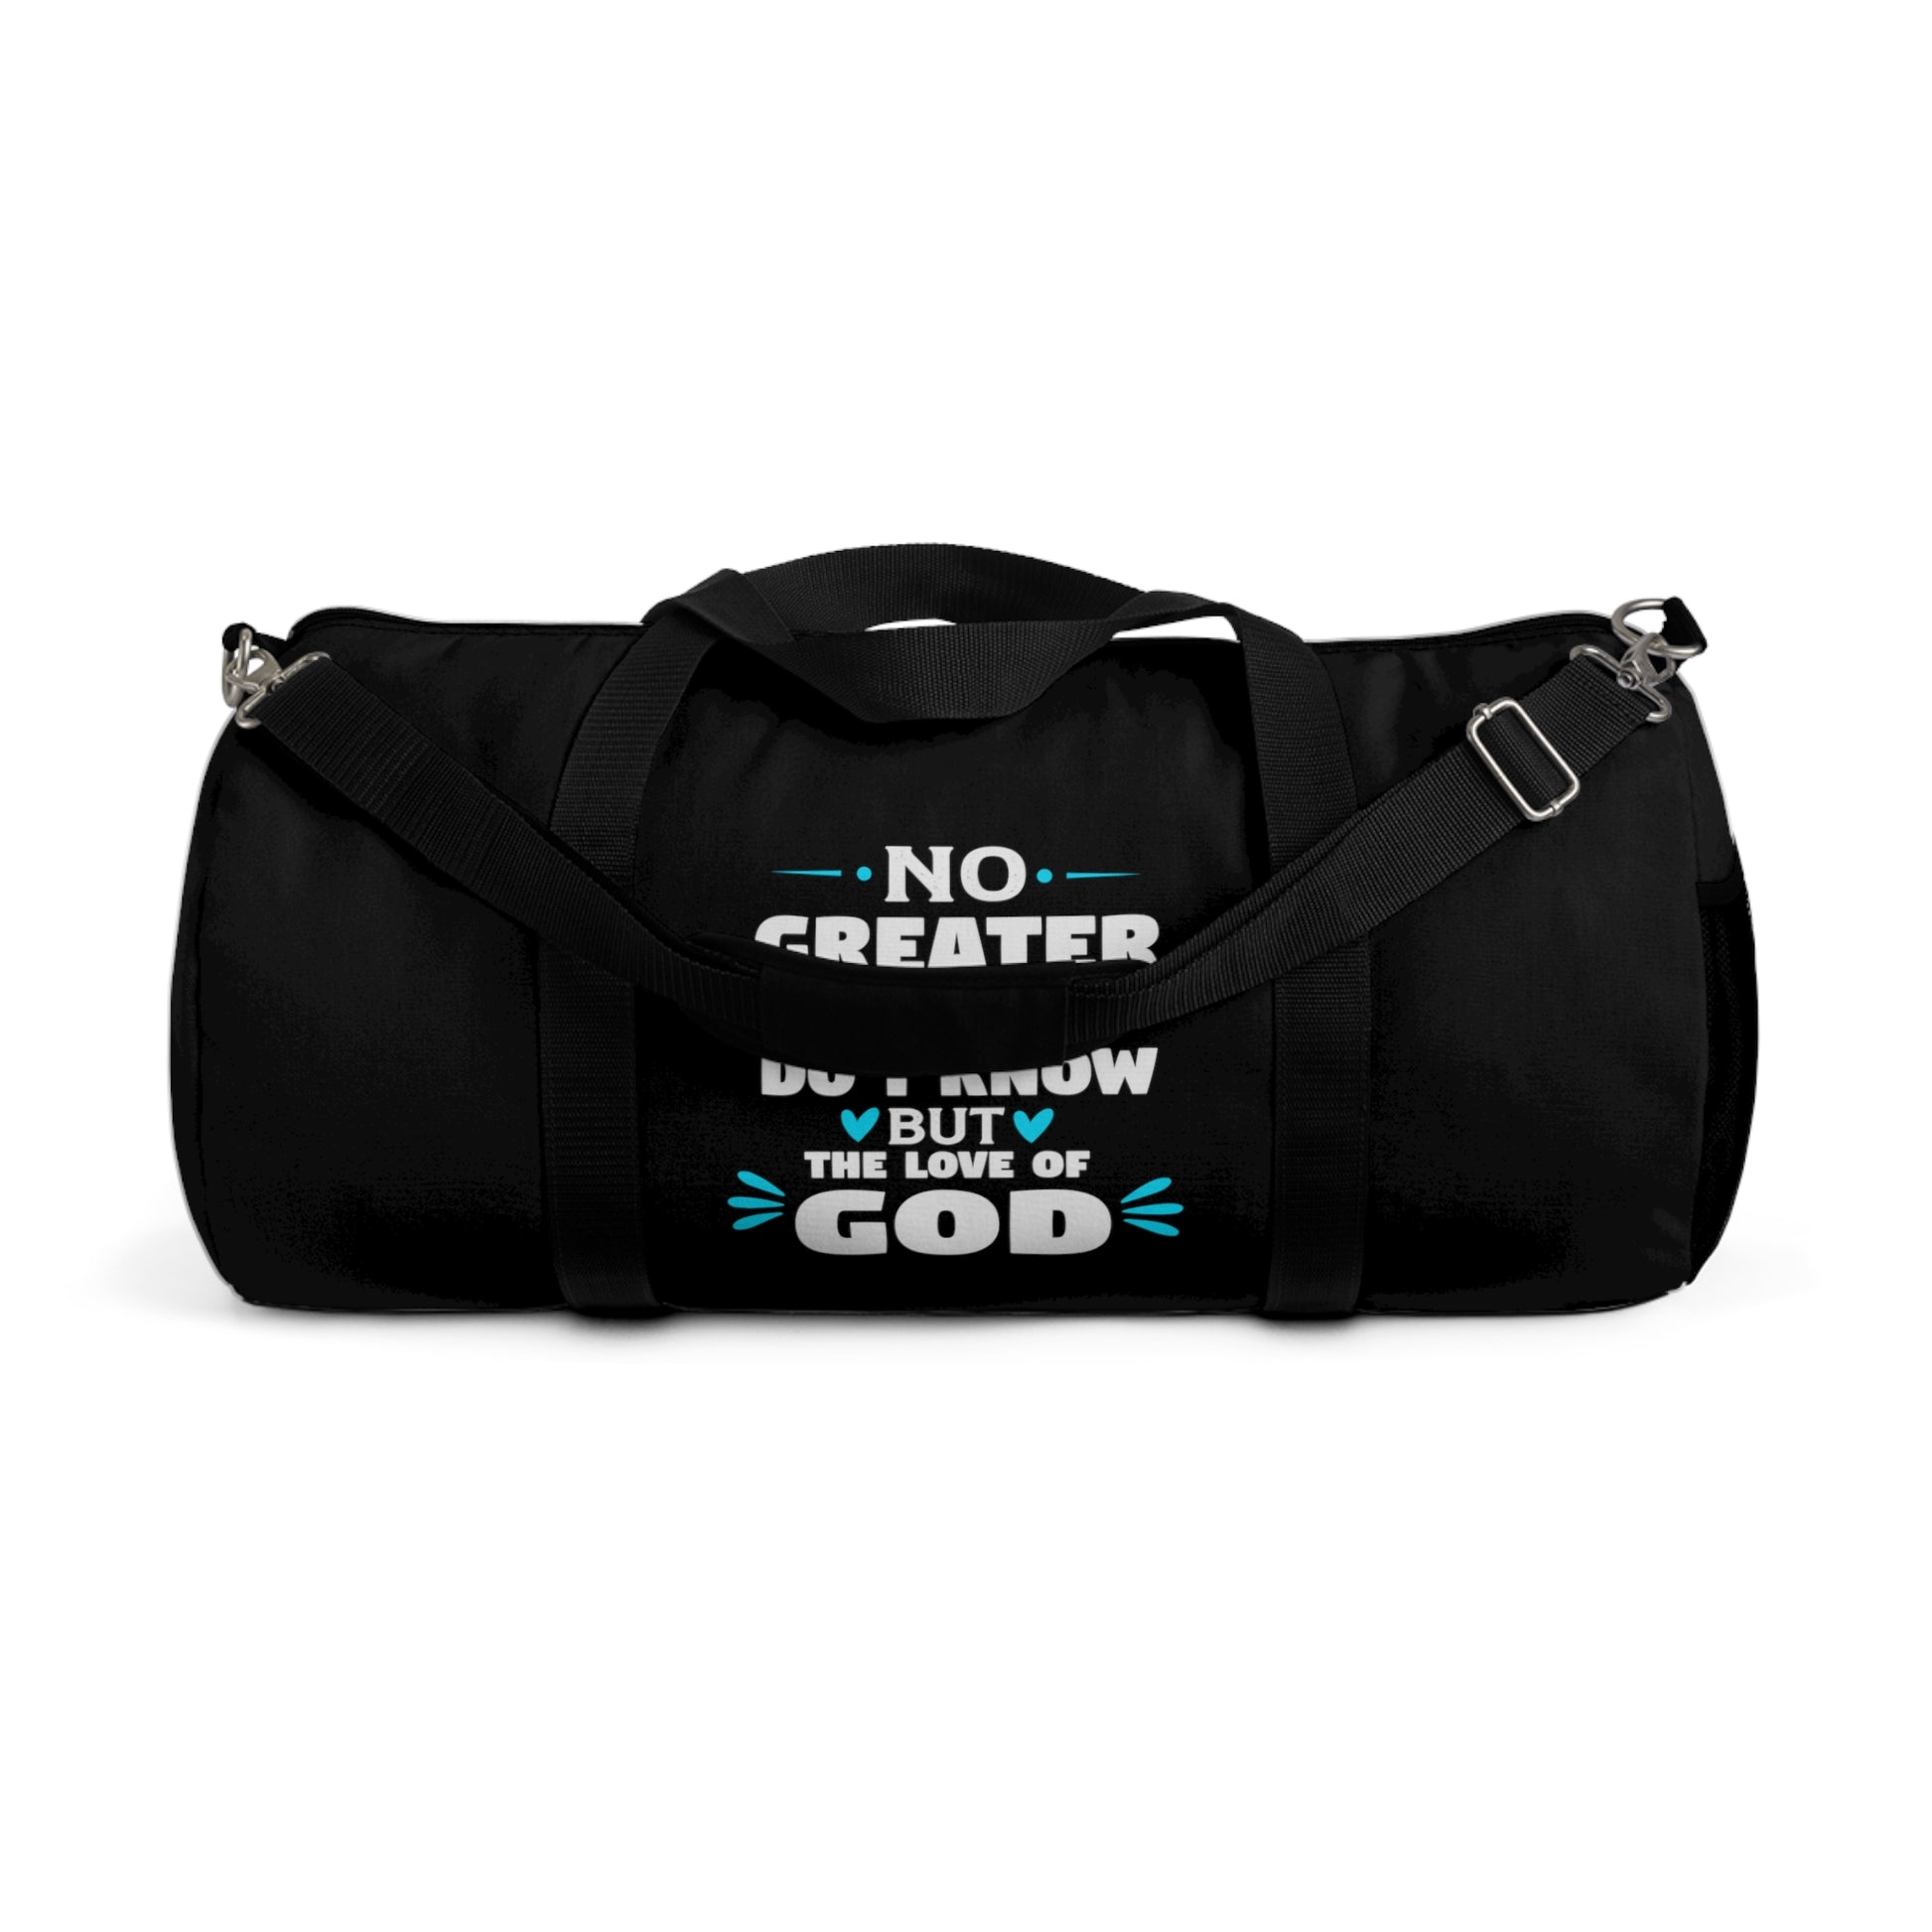 No Greater Love Do I Know But The Love Of God Christian Duffel Bag Printify